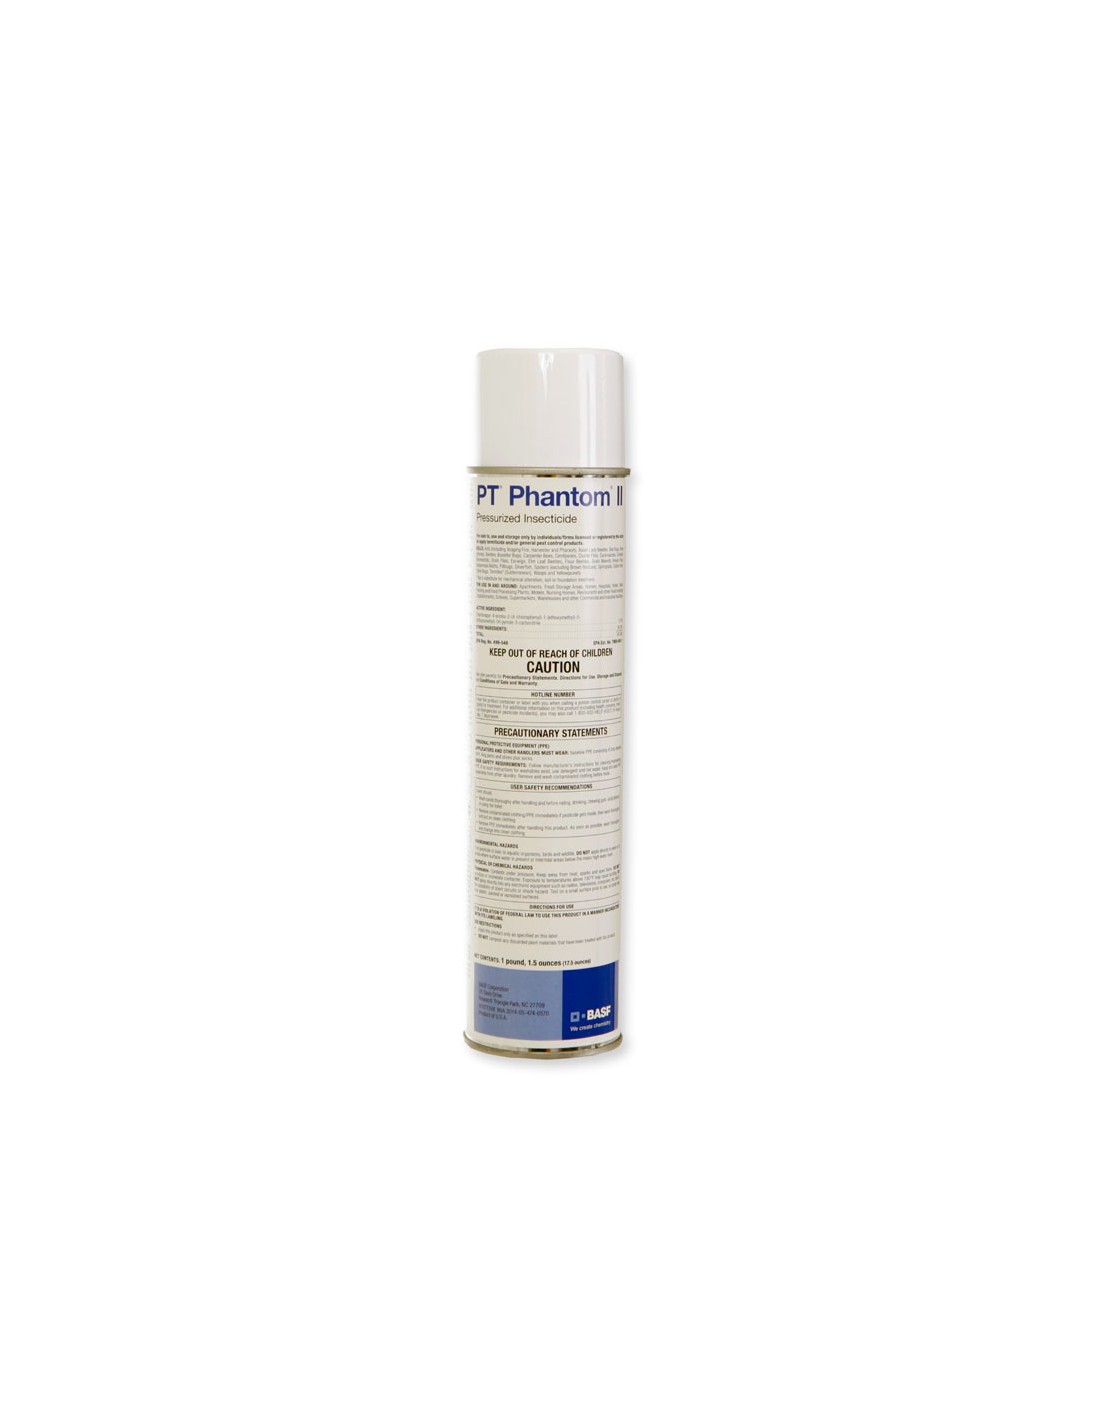 PT Phantom II Pressurized Insecticide Spray Questions & Answers